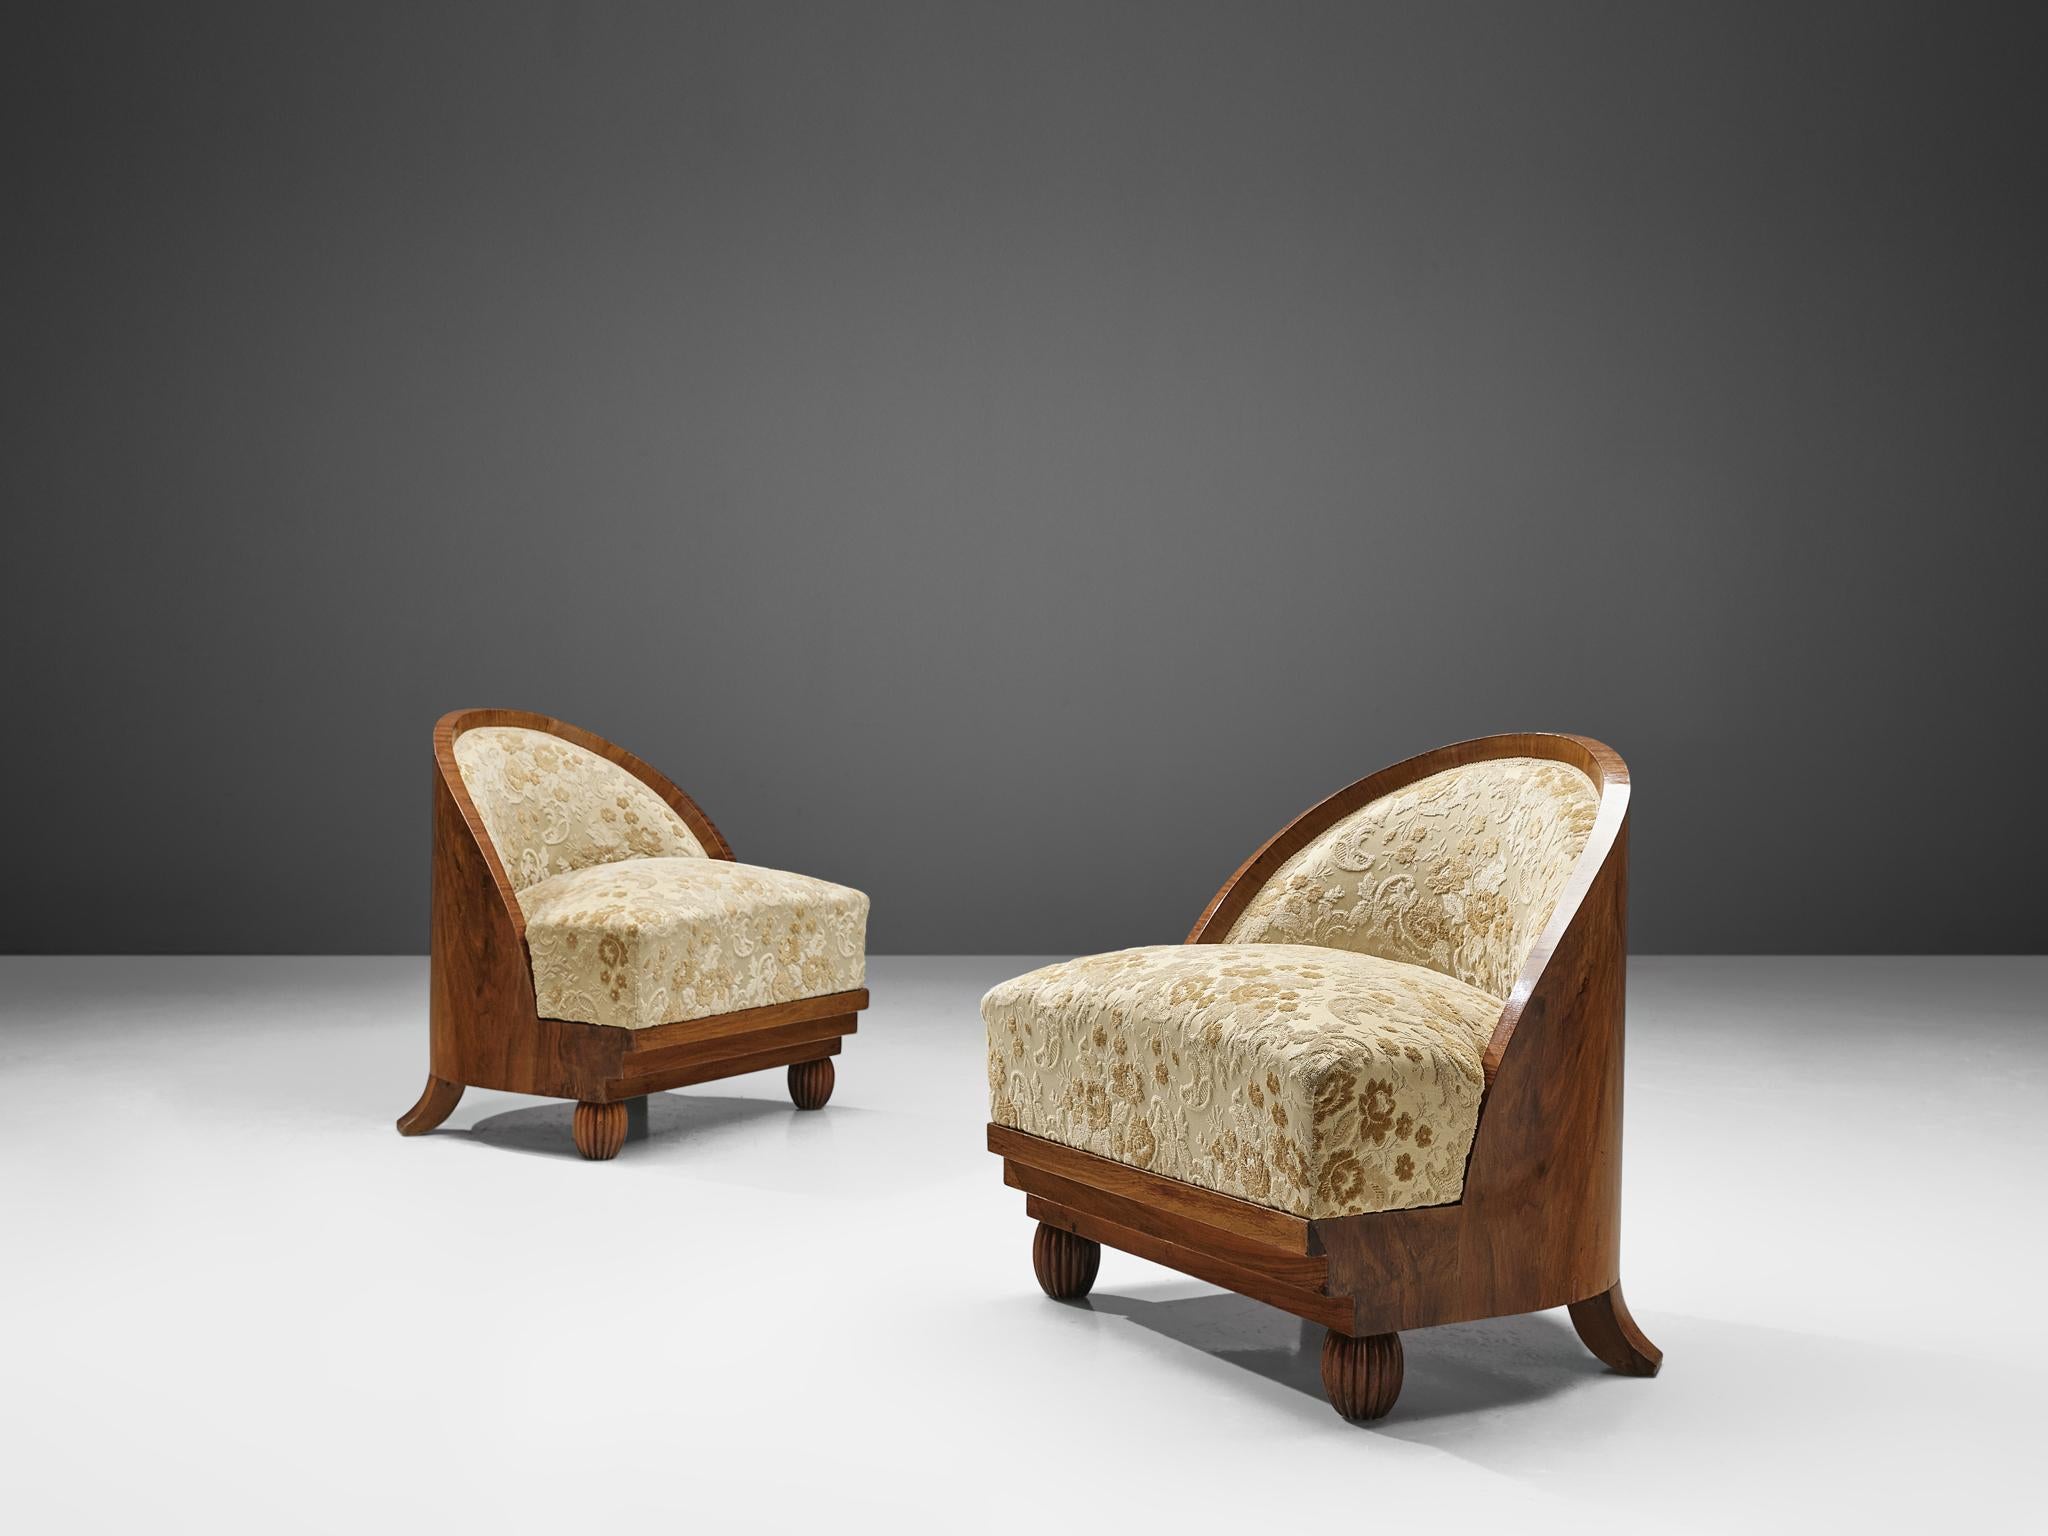 Art Deco lounge chairs by Ducrot Studio, walnut and fabric upholstery, Palermo, circa 1930.

Elegant Art Deco lounge chairs by Ducrot Studio. These chairs are upholstered in a cream colored fabric with a floral design. The backs of these chairs